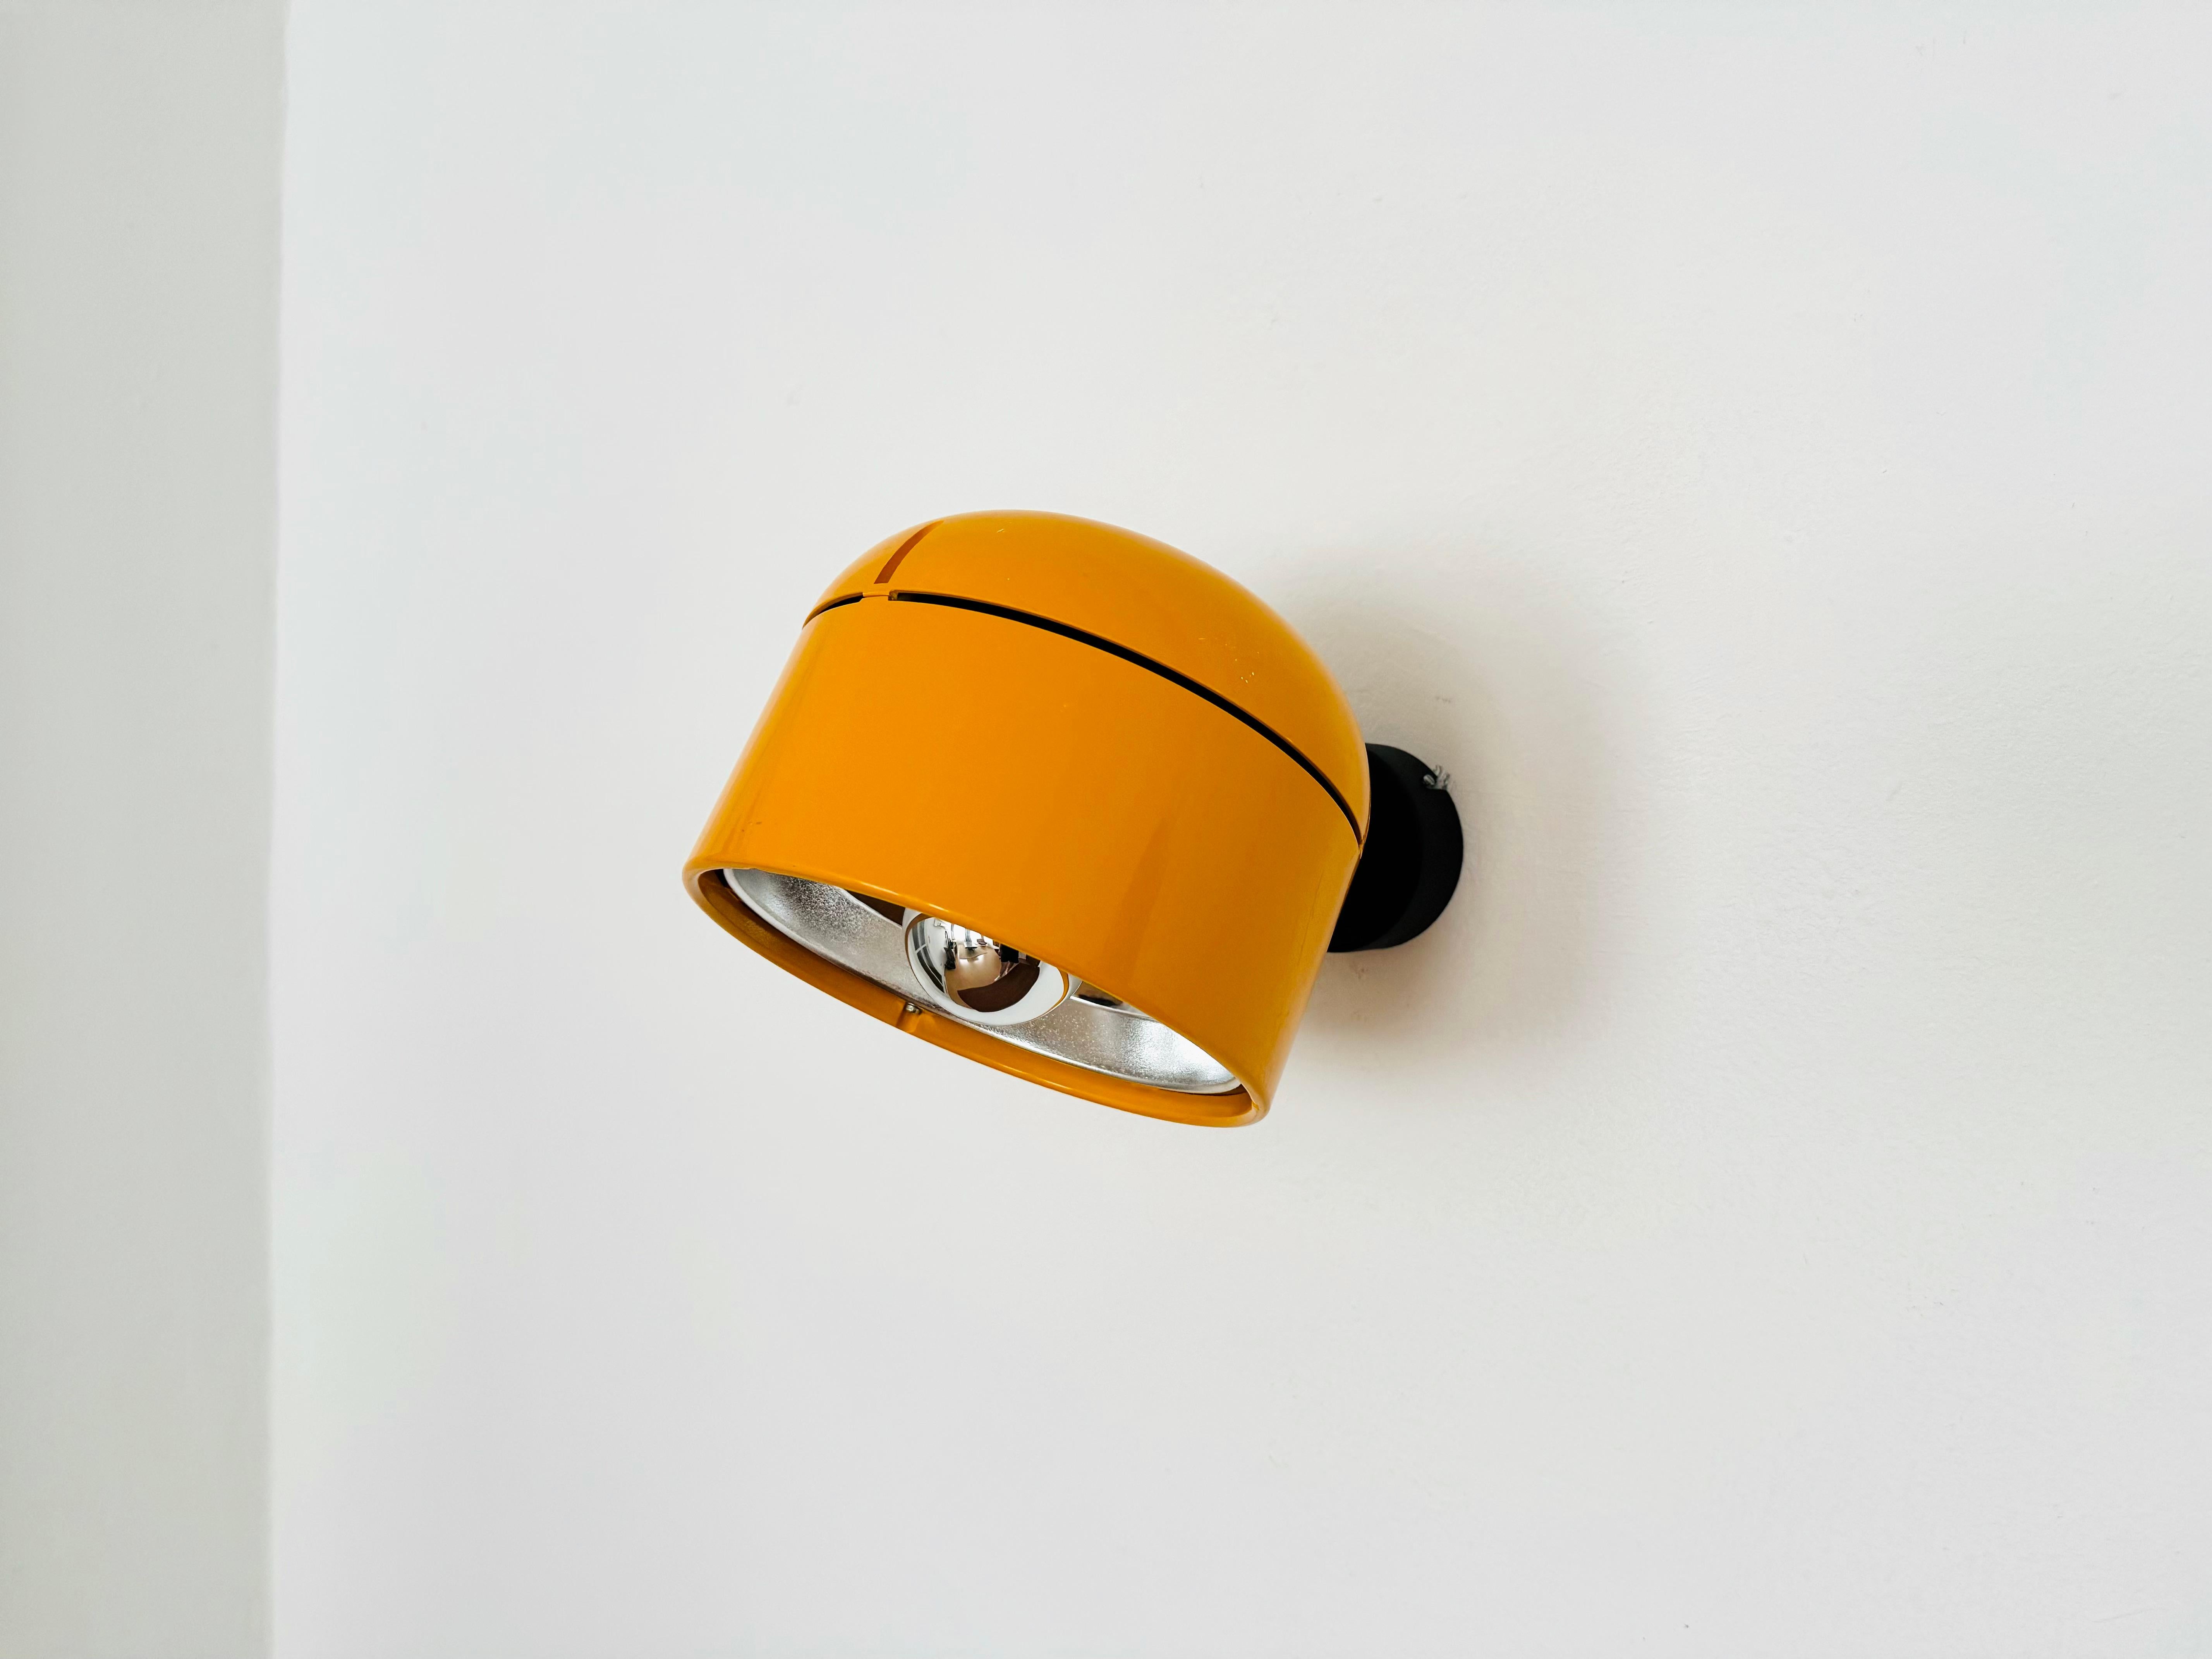 Fantastic lamp for wall or ceiling mounting from the 1970s.
The Staff brand is known for its high-quality workmanship and perfectionist design.
The large yellow-orange lamp head is infinitely adjustable.
The mirror reflector creates a focused light